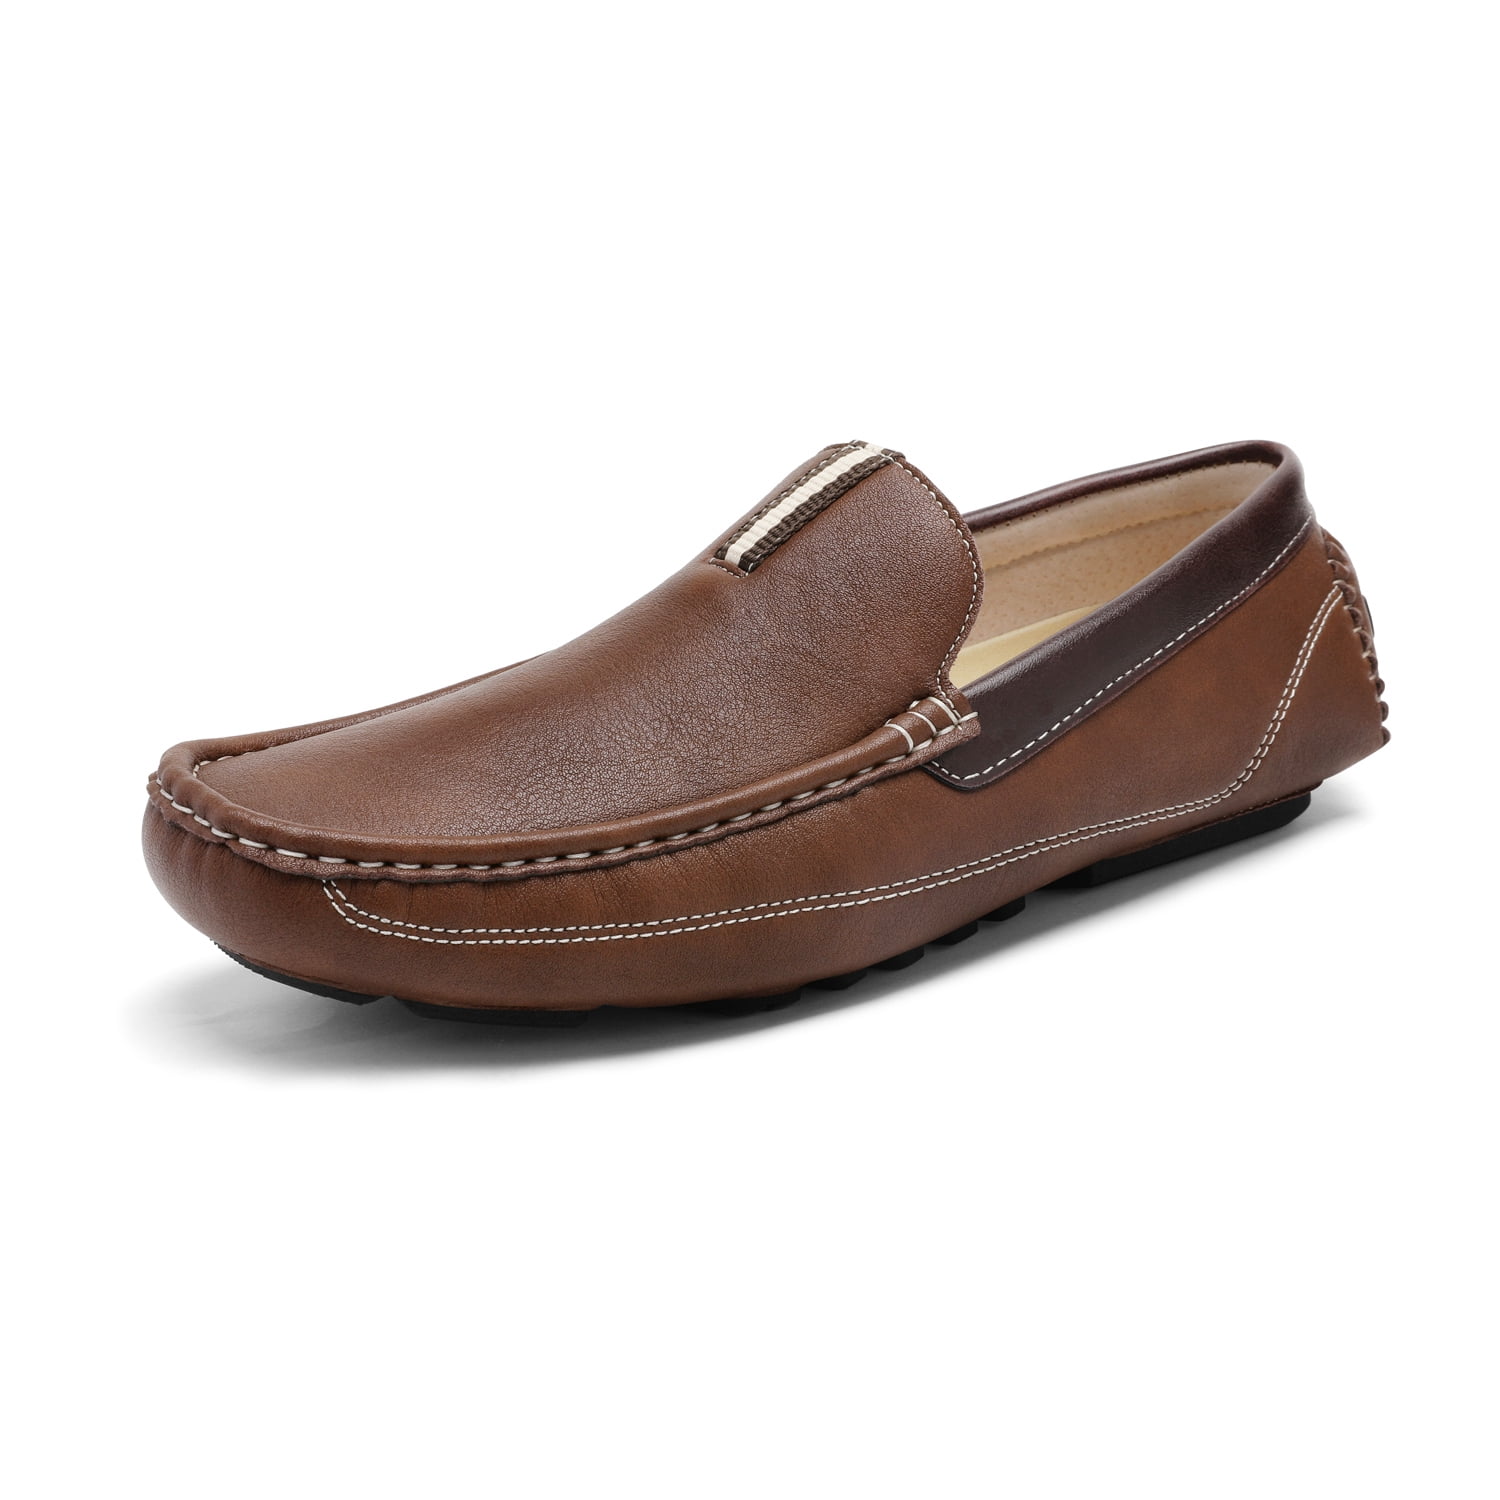 Bruno Marc Men's Boat Shoes Deck Driving Penny Loafers 